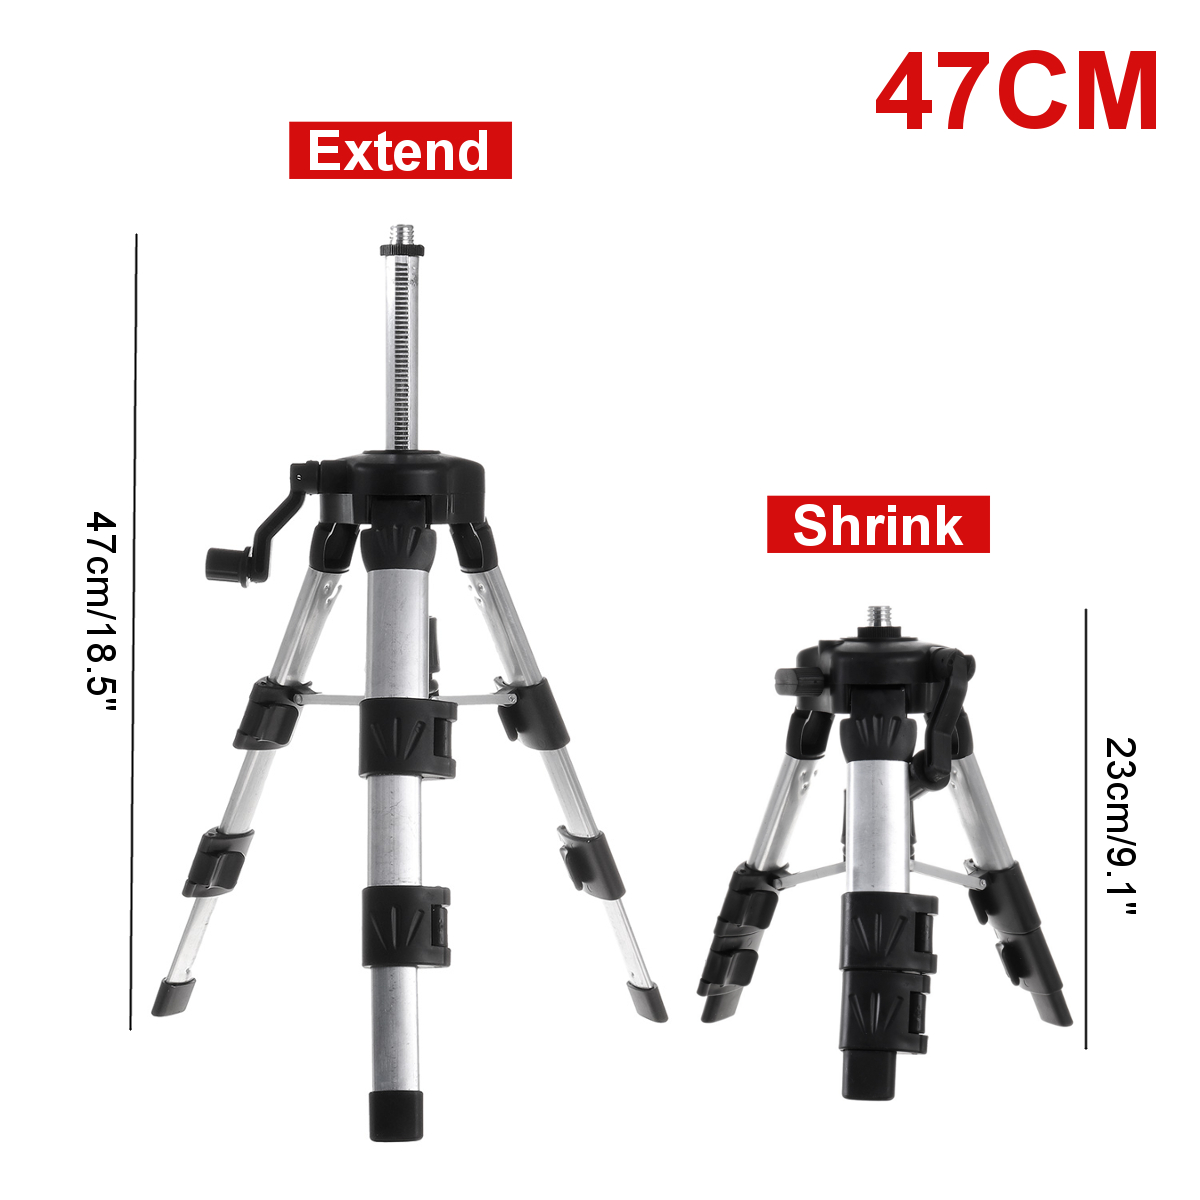 47100CM-Universal-Aluminum-Alloy-Tripod-Adjustable-Stand-for-Laser-Level-with-Bag-1937846-3